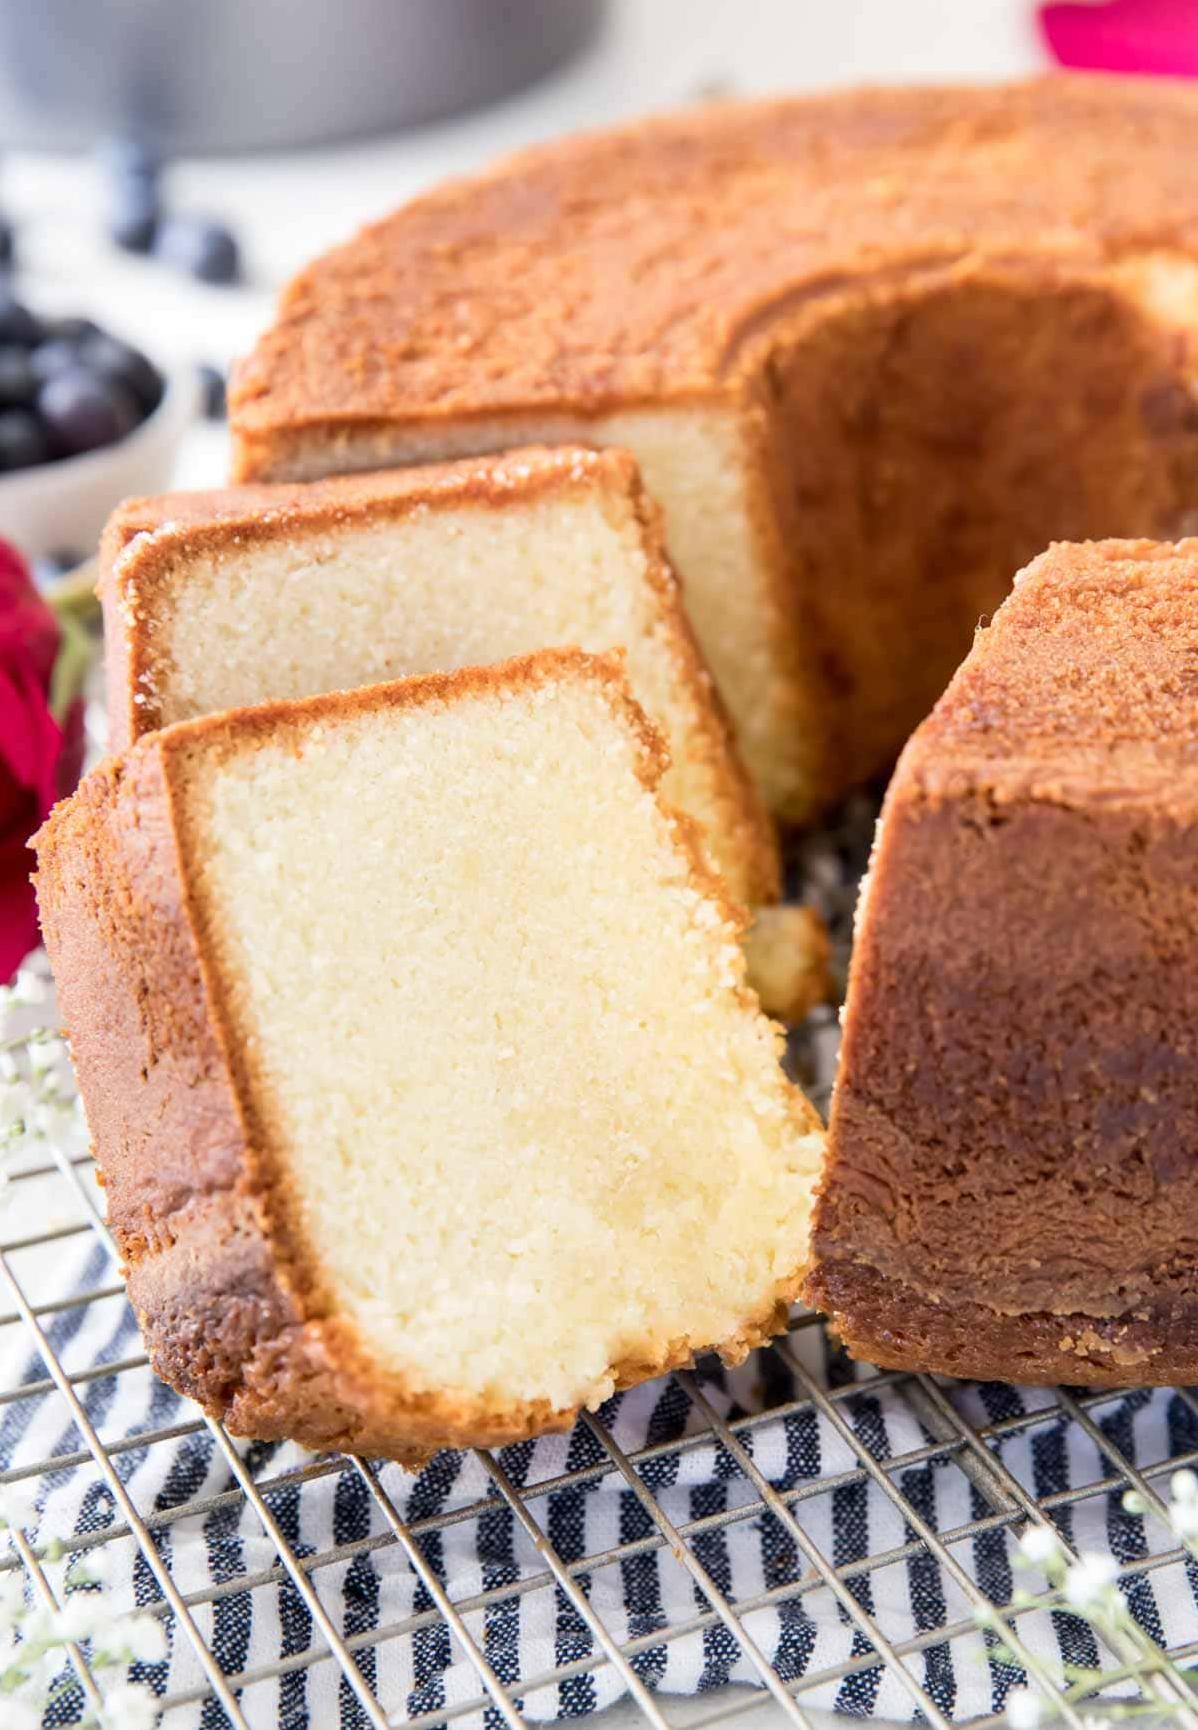  The most expensive pound cake you'll ever taste.